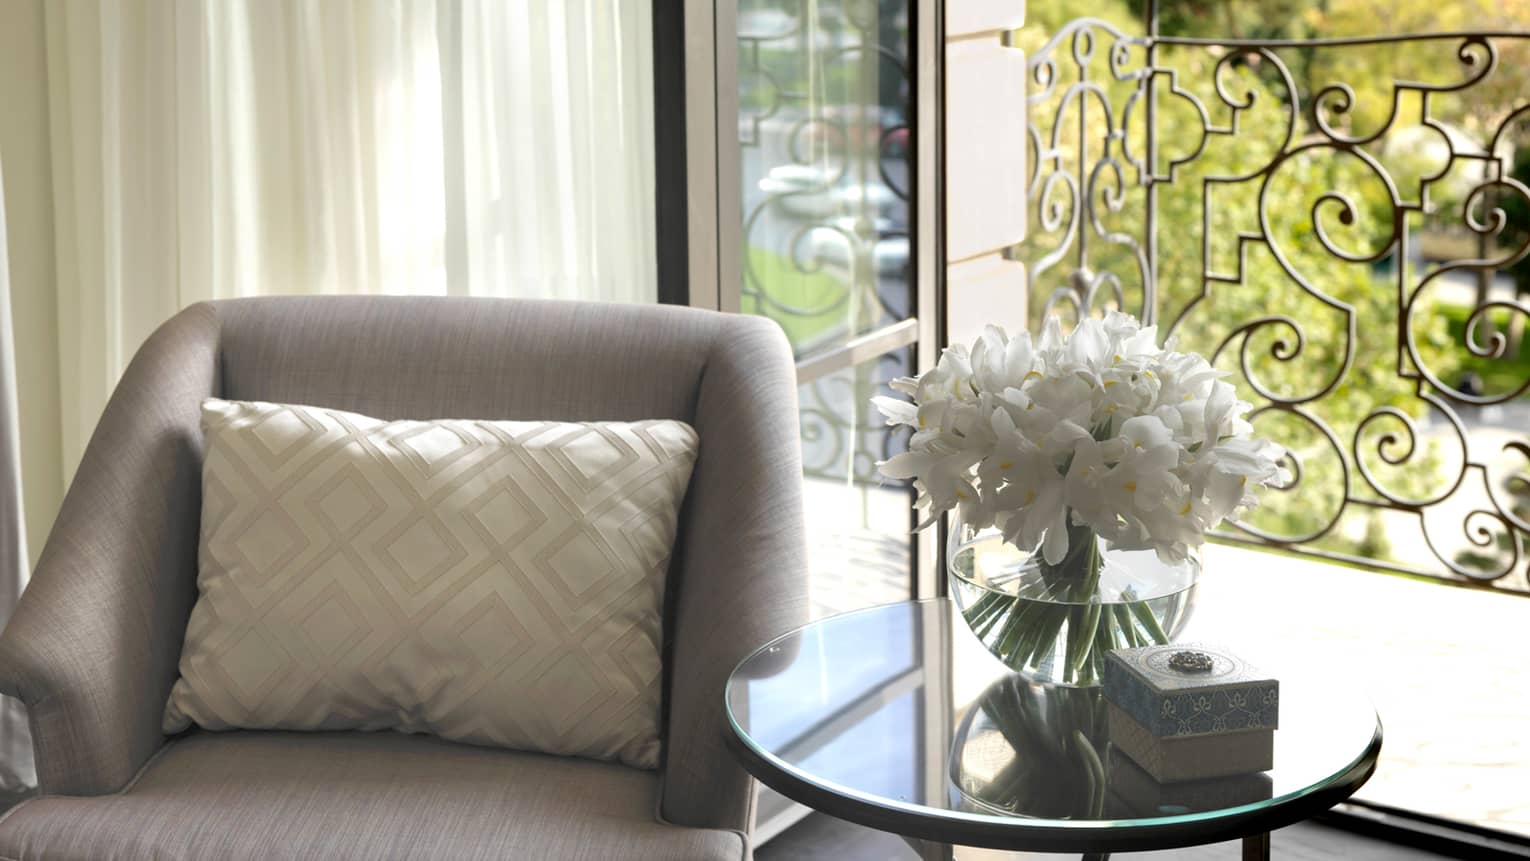 Close up of grey armchair with white accent pillow, glass table and vase with white flowers in sunny window